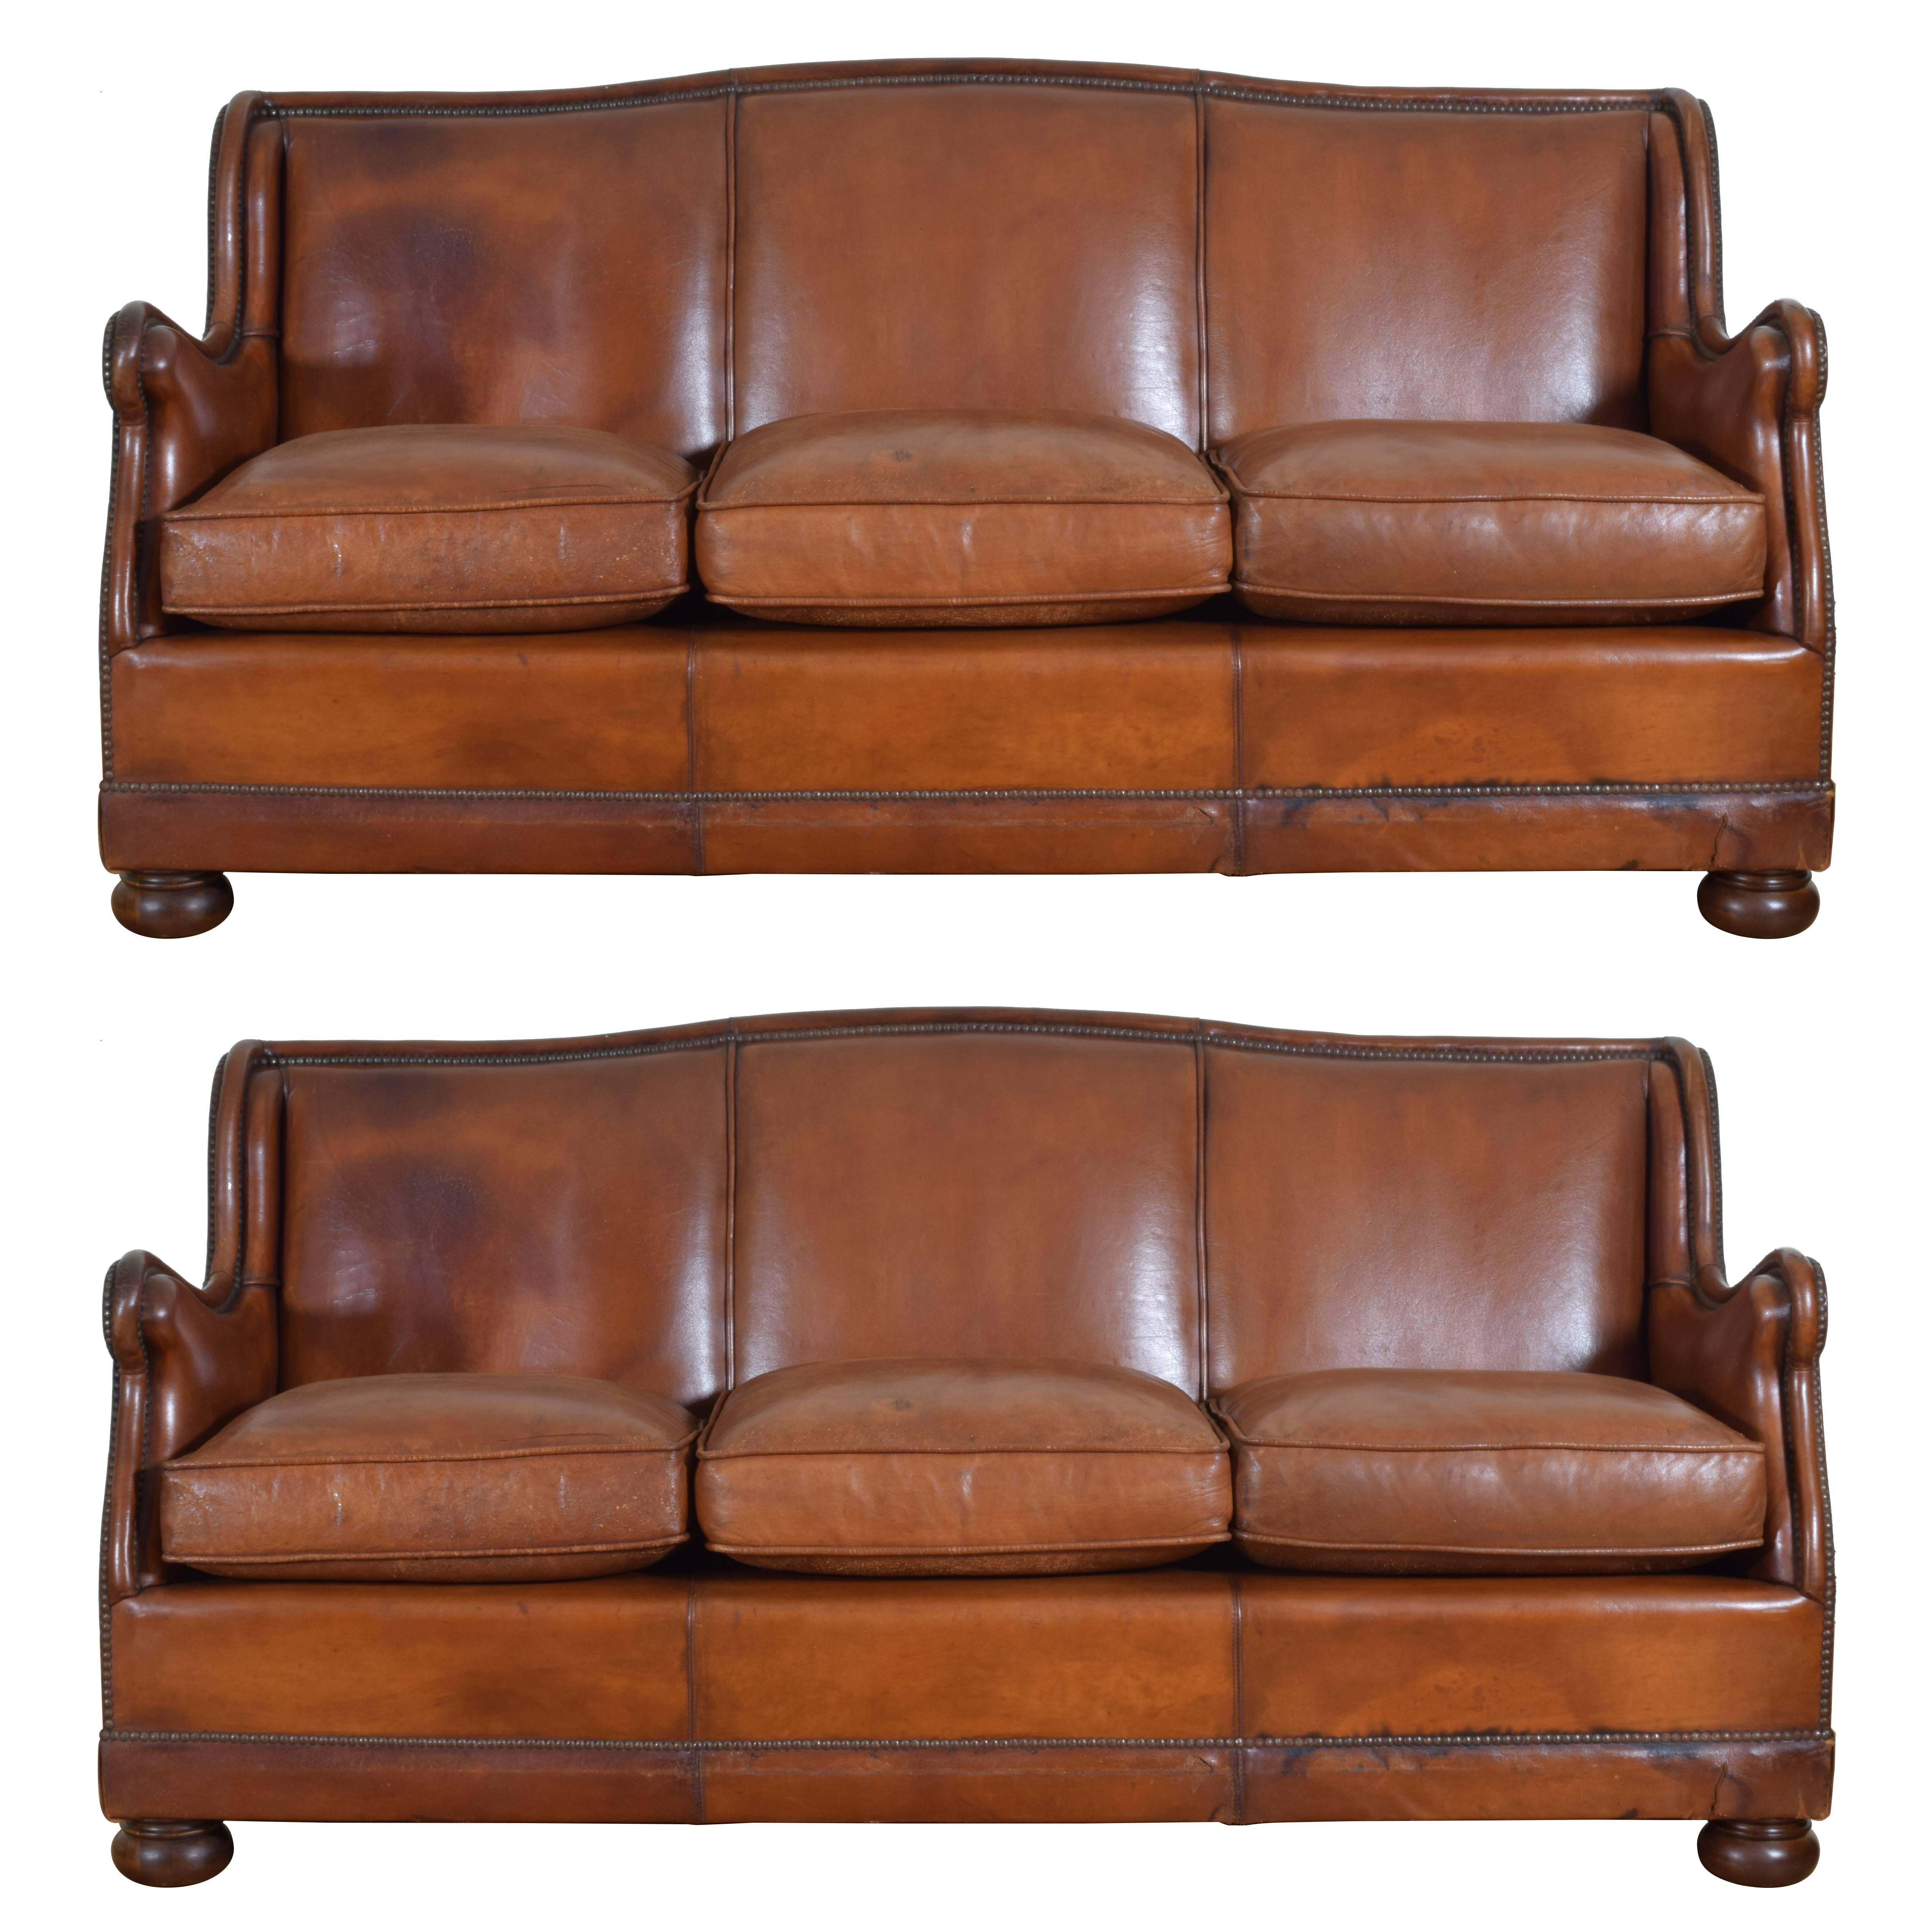 Pair of French Leather Sofas with Down Cushions, Mid-20th Century